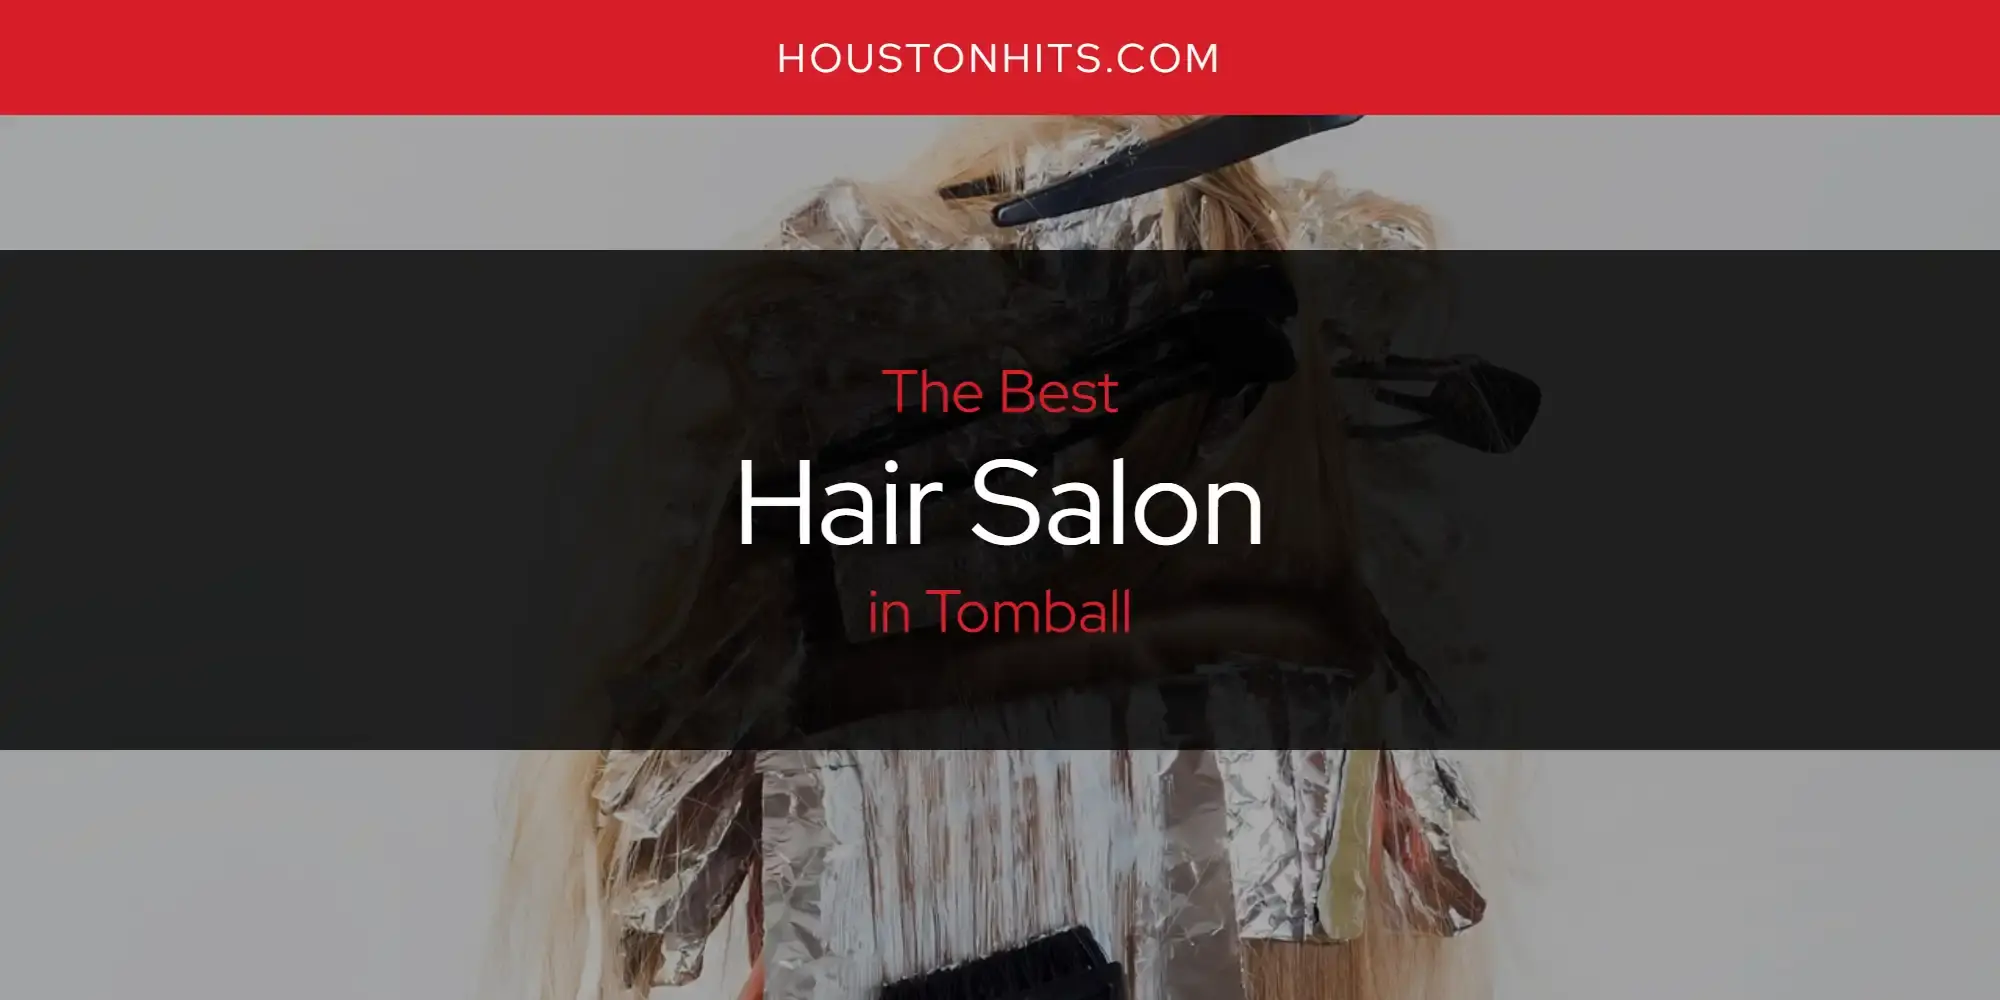 Best Hair Salon in Tomball? Here's the Top 17